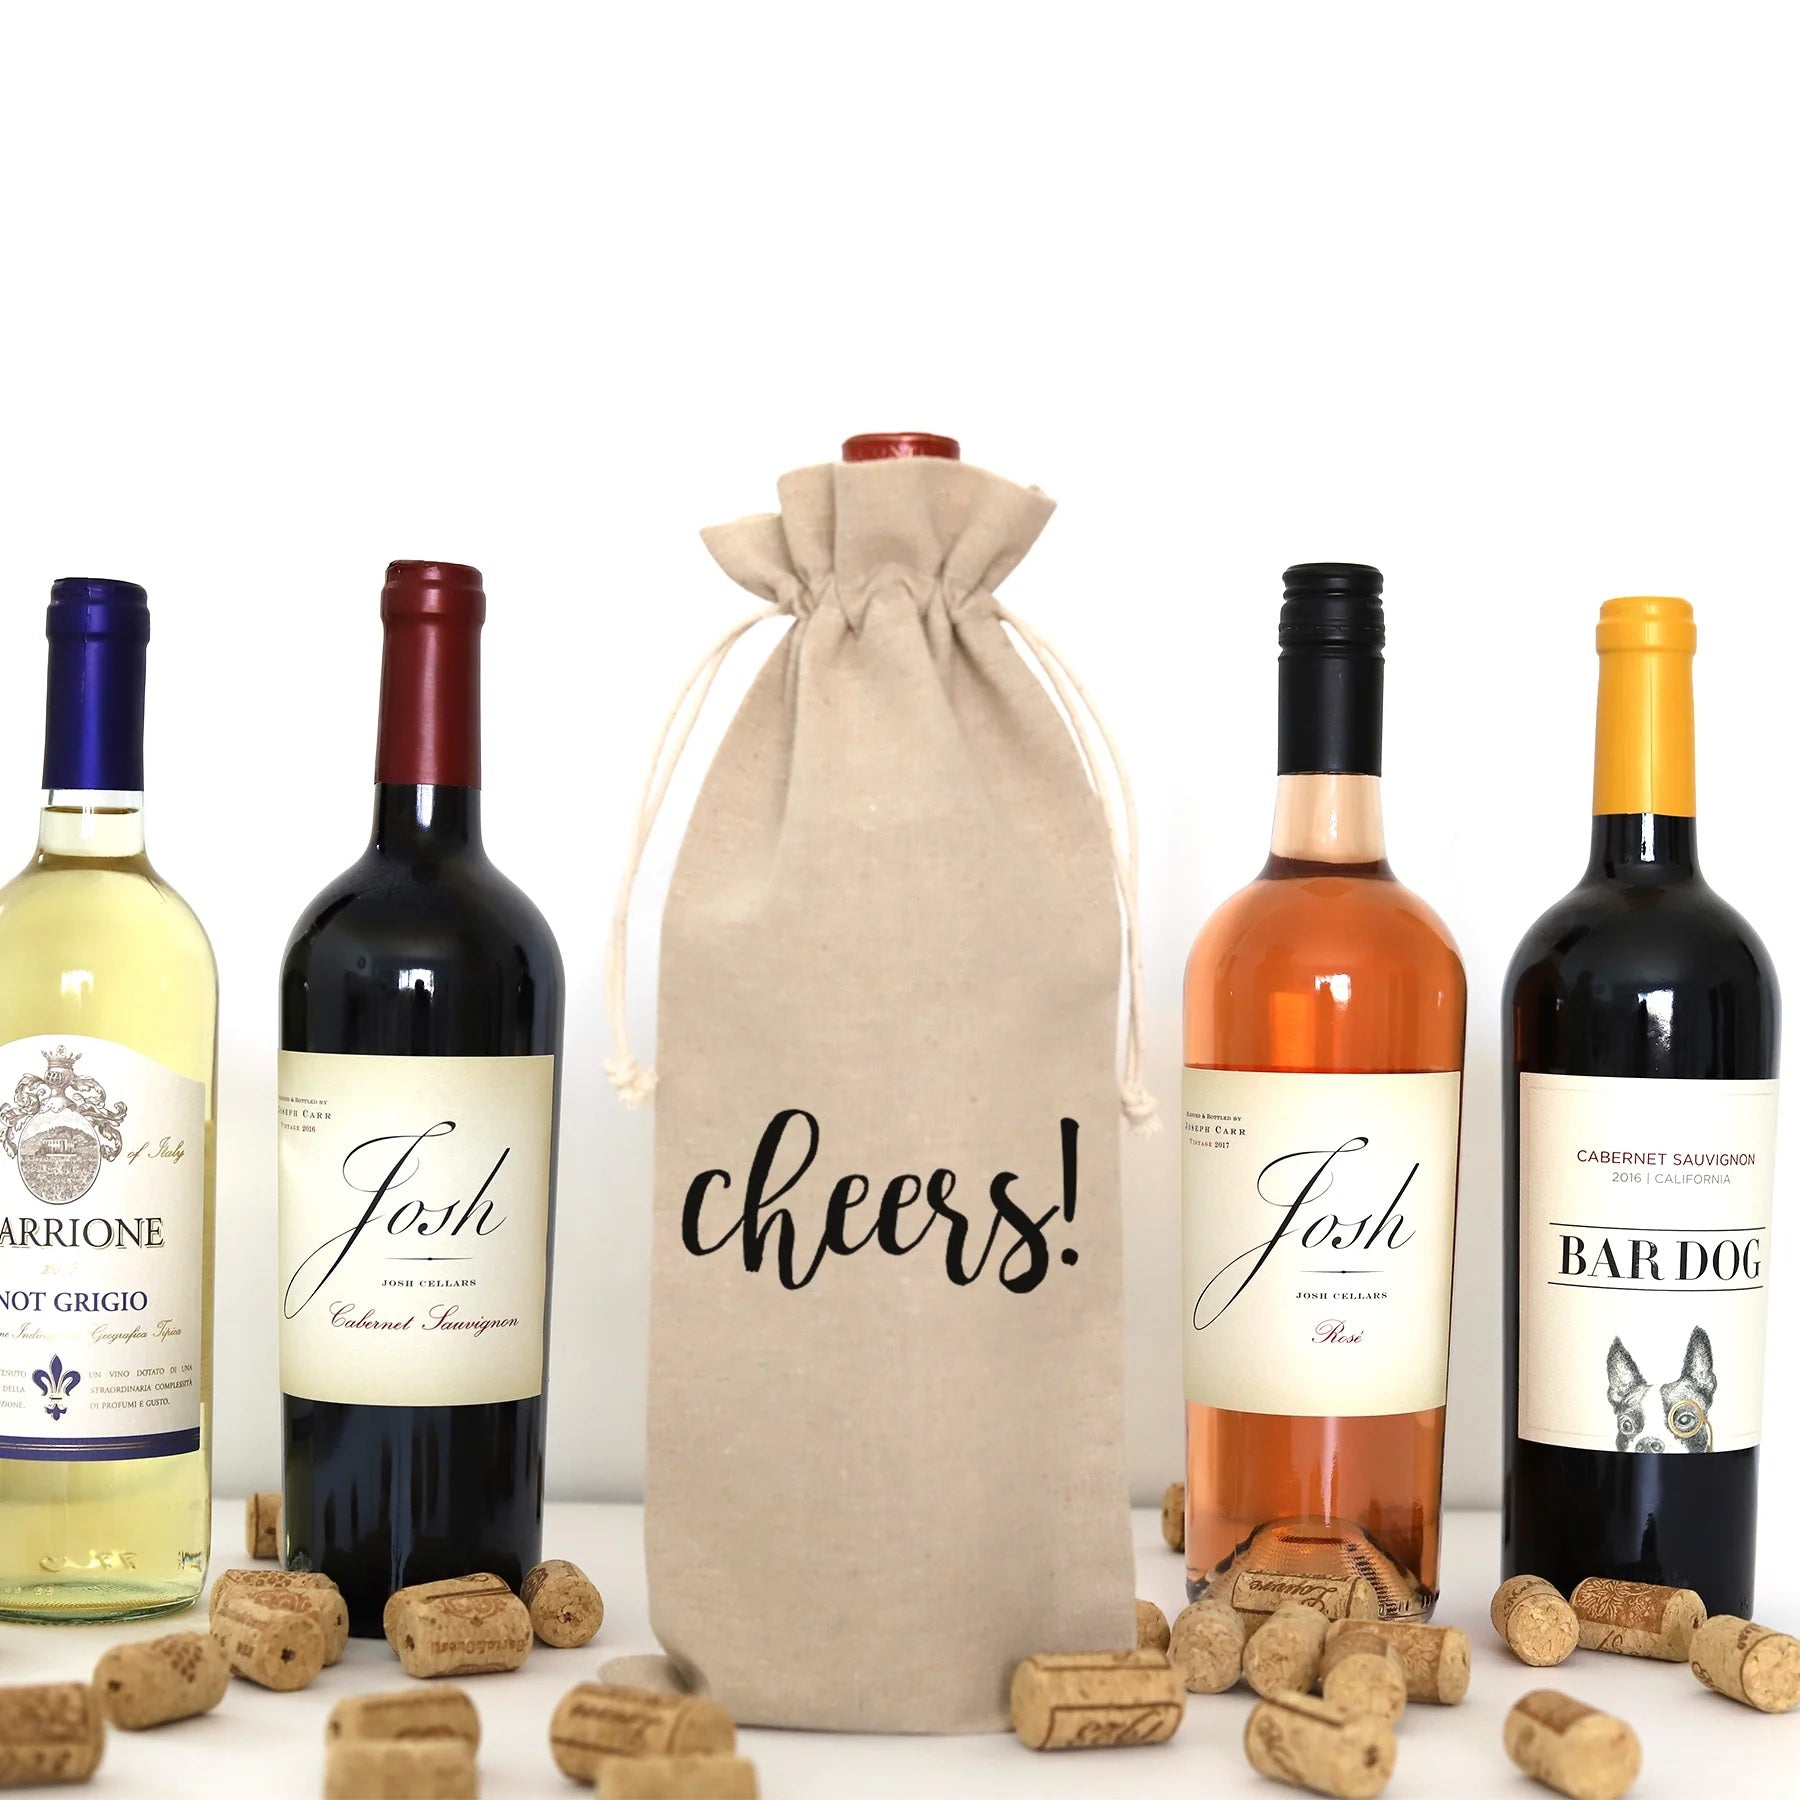 A wine bag with the words "Cheers!" printed on it.